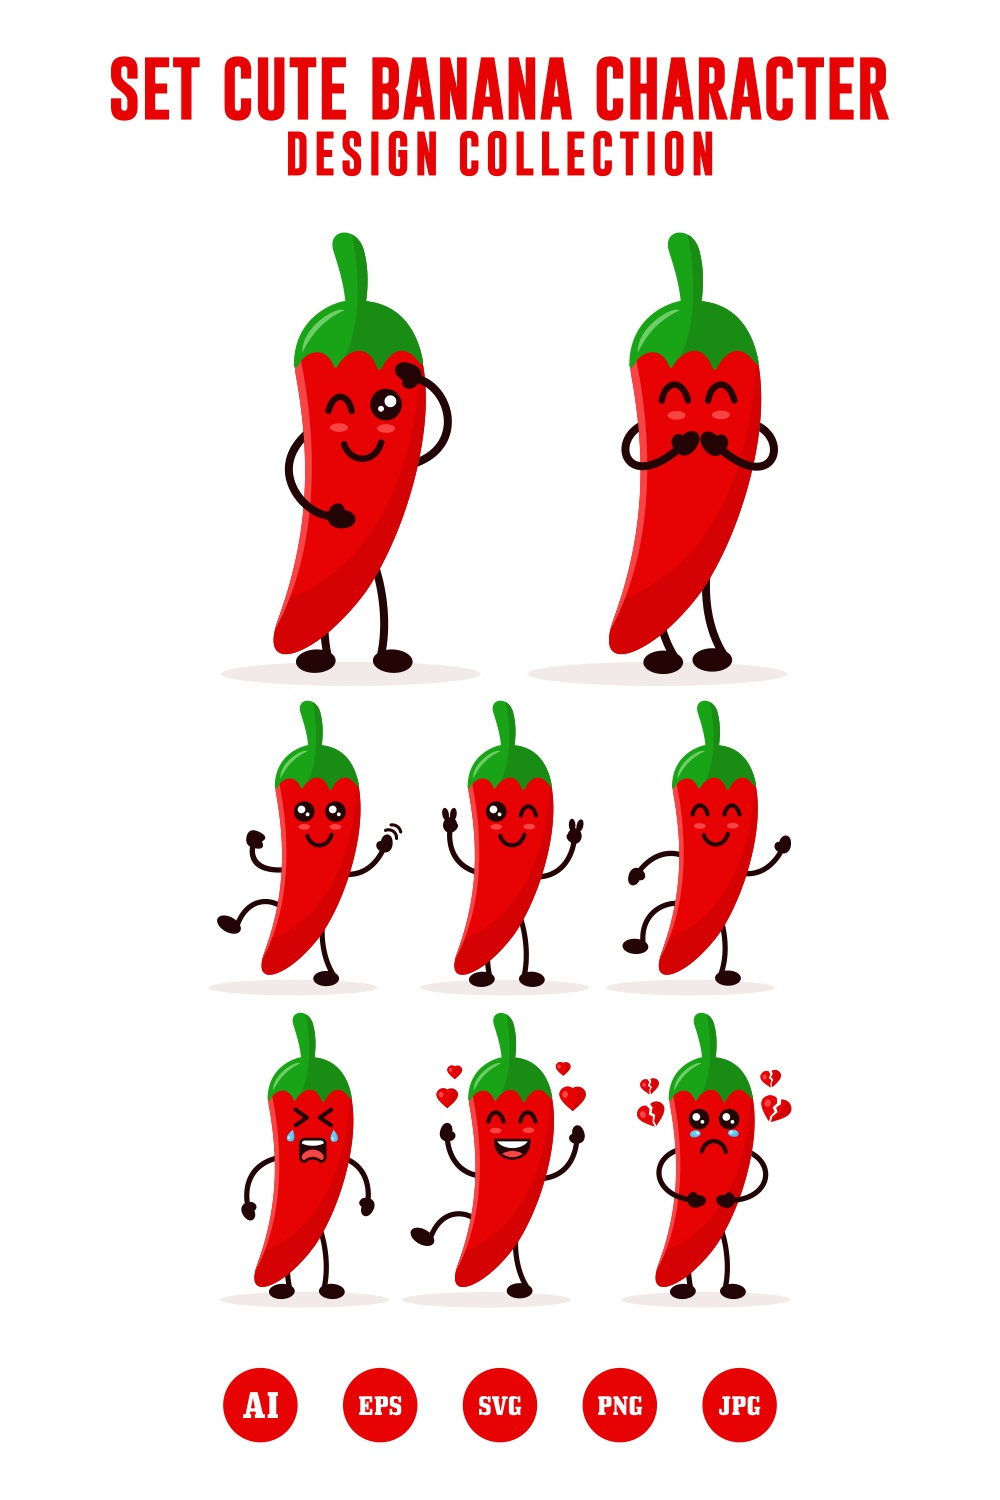 Set cute chili charater vector illustration - $4 pinterest preview image.